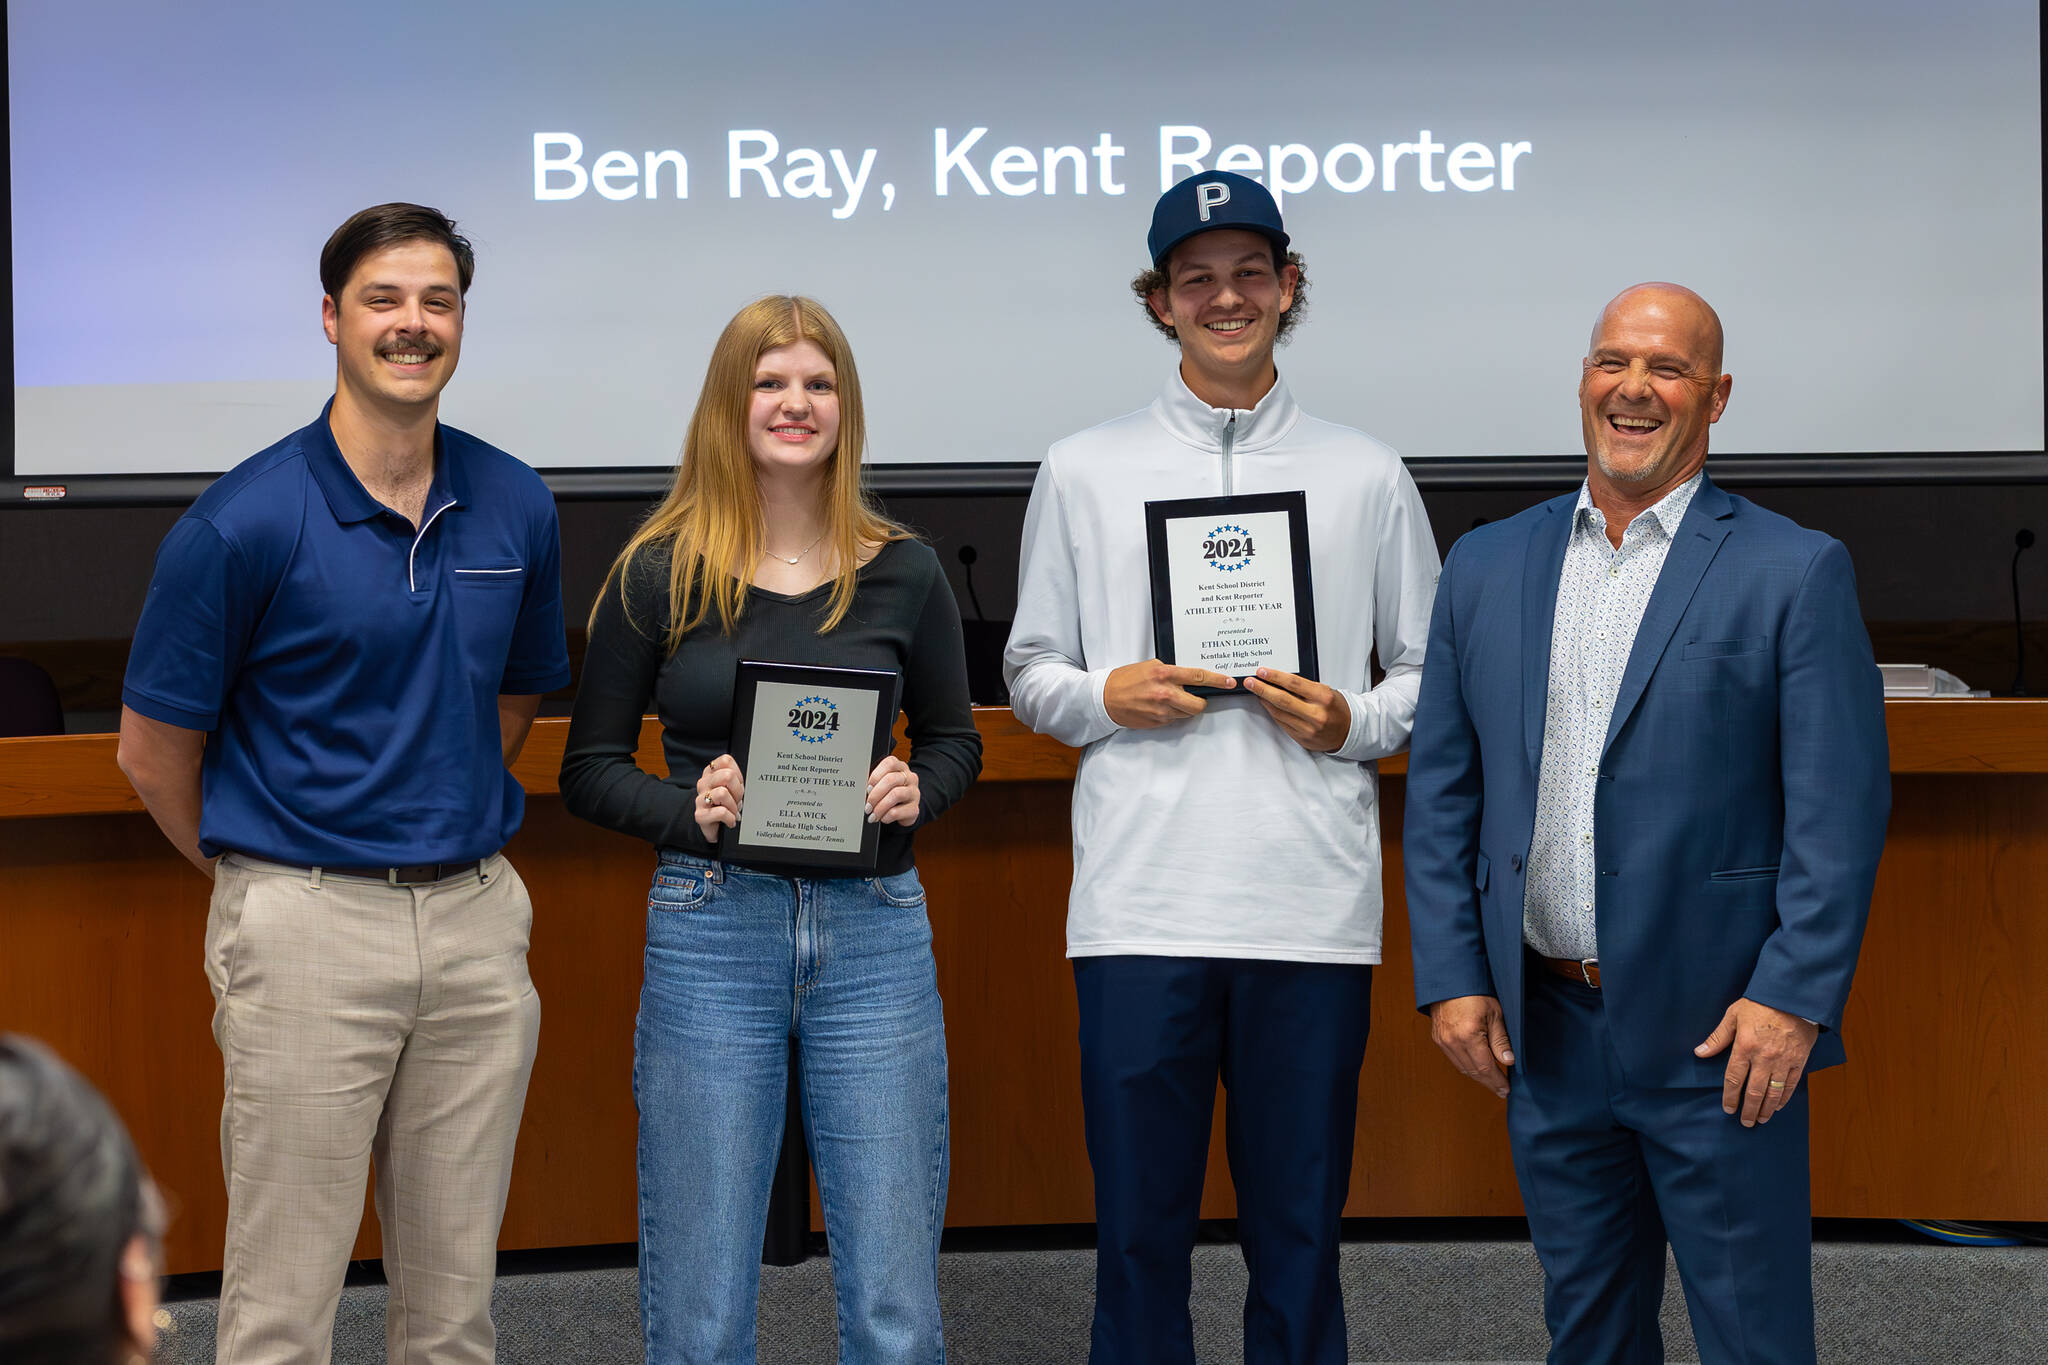 2024 Kent Reporter Athletes of the Year are Ella Wick and Ethan Loghry. Pictured left to right: Kent Reporter sports writer Ben Ray, Ella Wick, Ethan Loghry, and Brian Smith, Kent School District Director of Athletics and Activities. Photo provided by ROBBY MULLIKIN